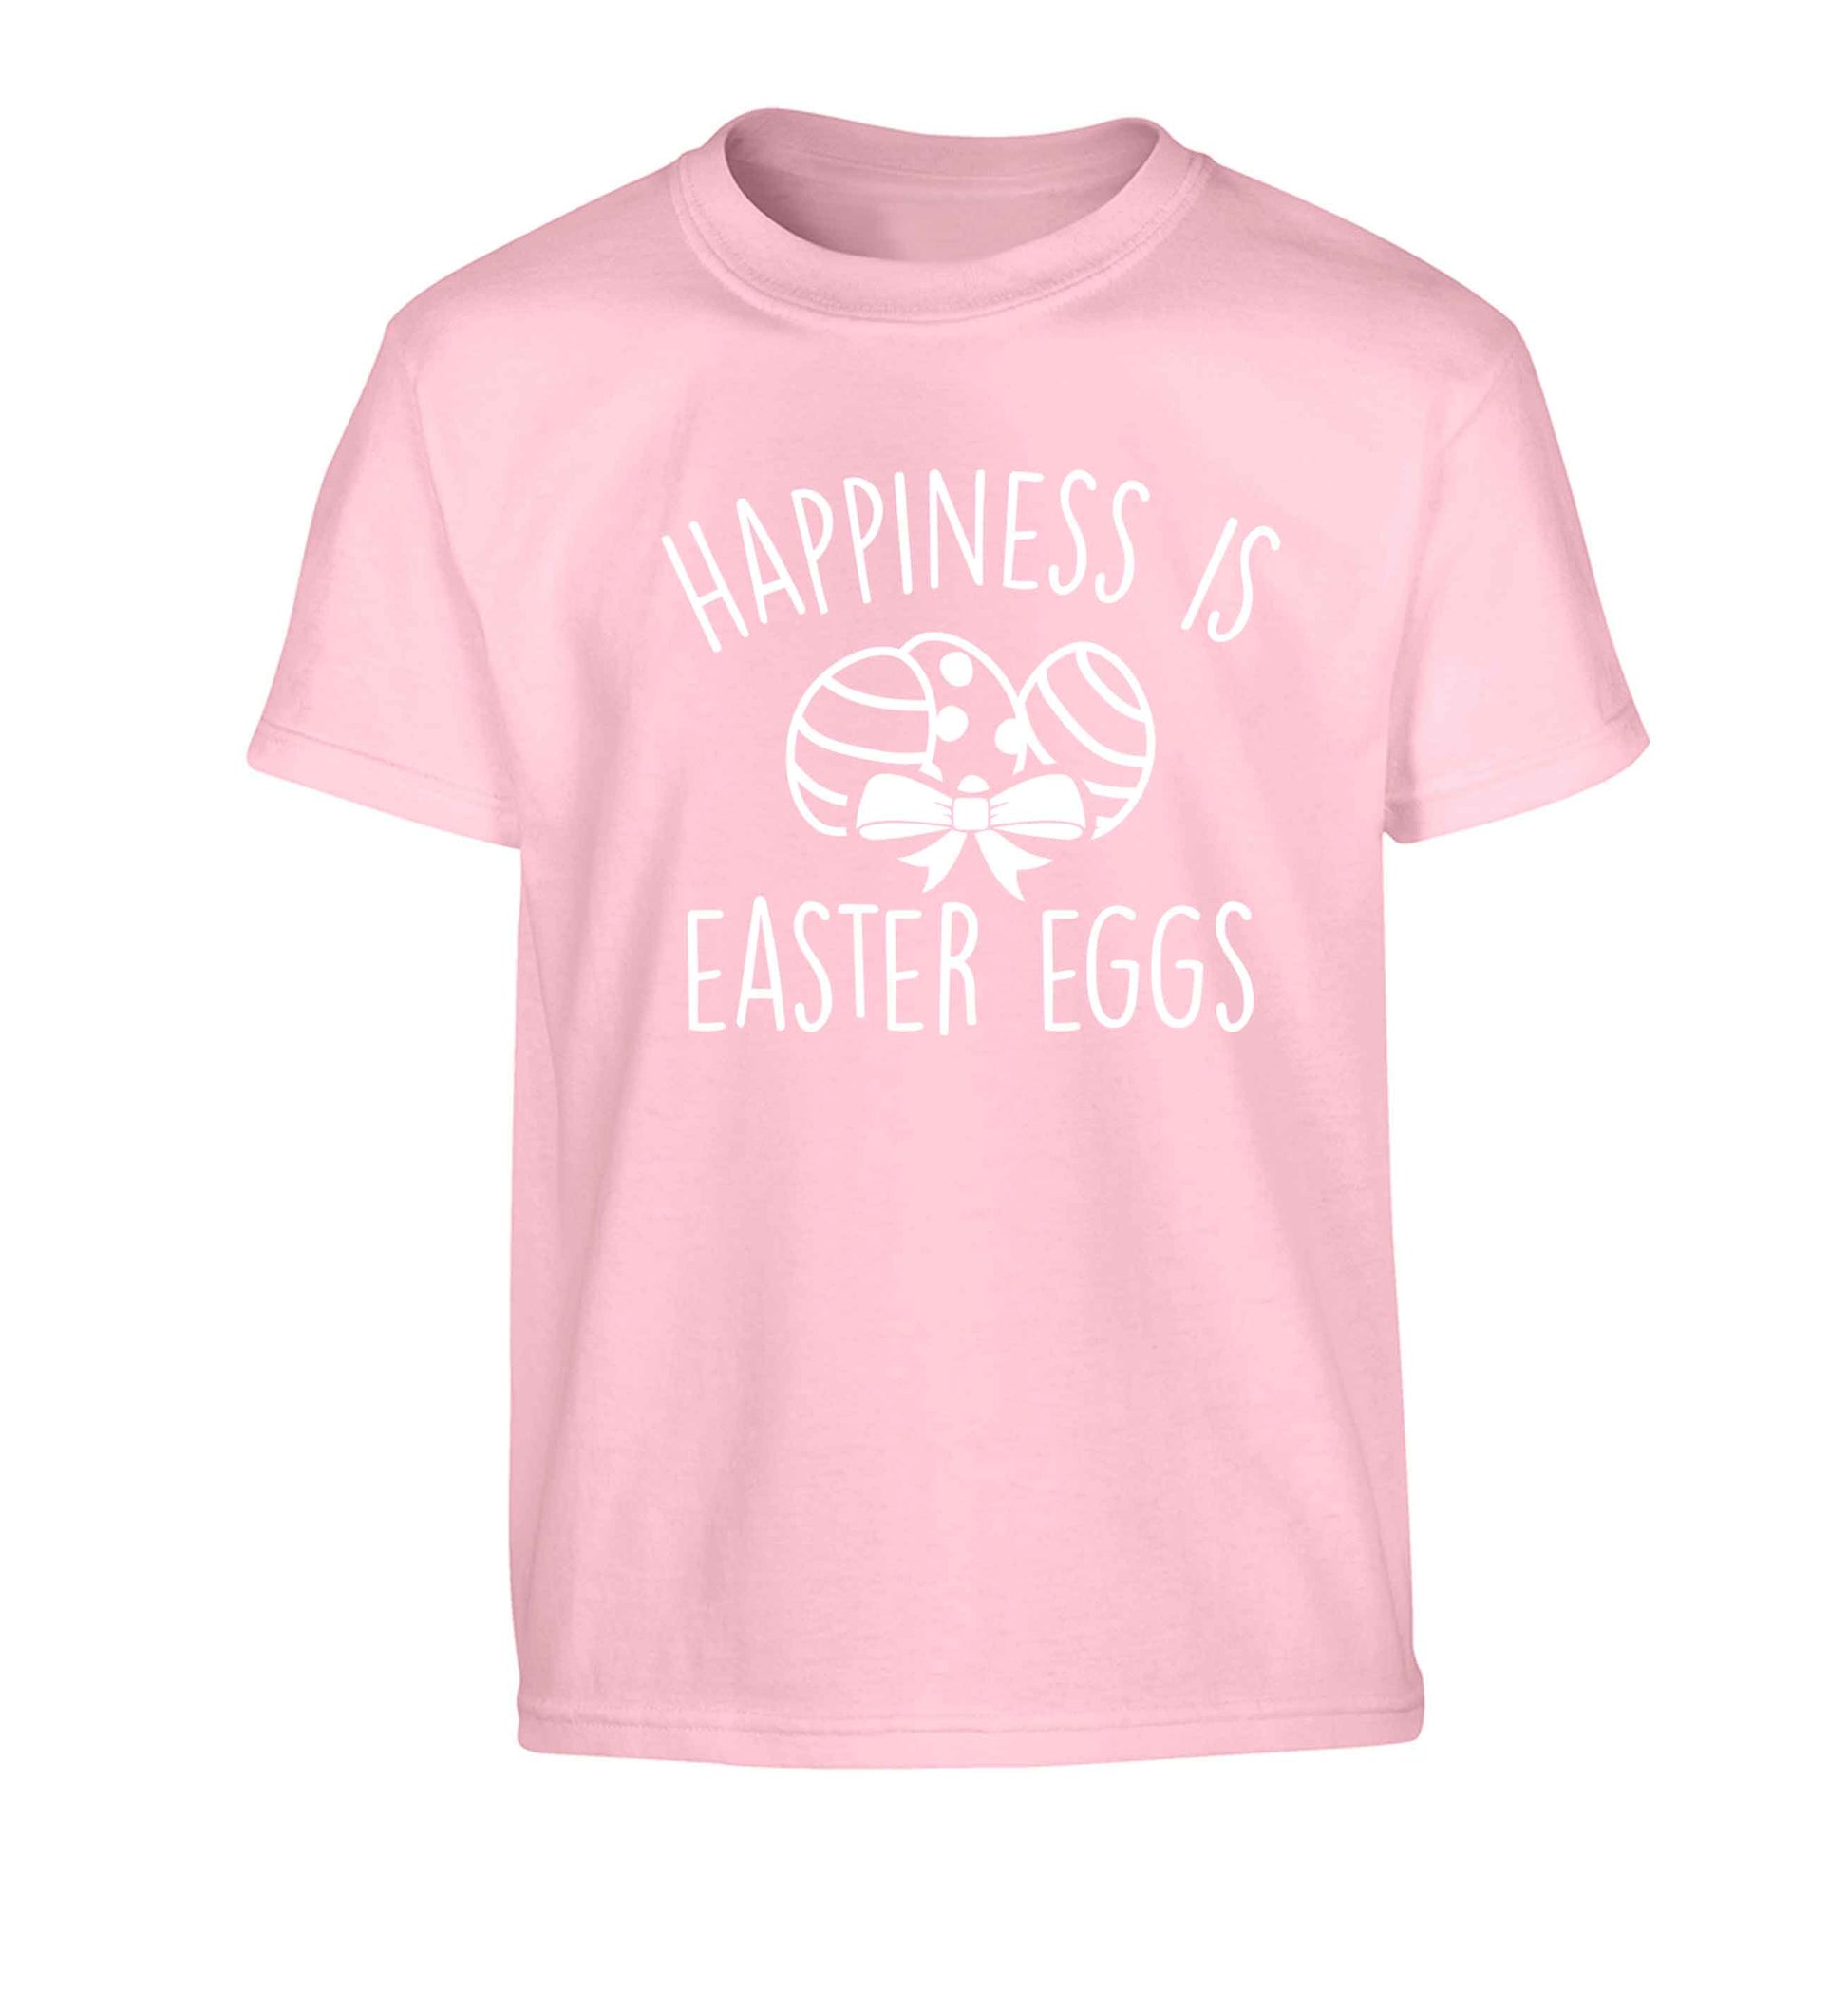 Happiness is Easter eggs Children's light pink Tshirt 12-13 Years